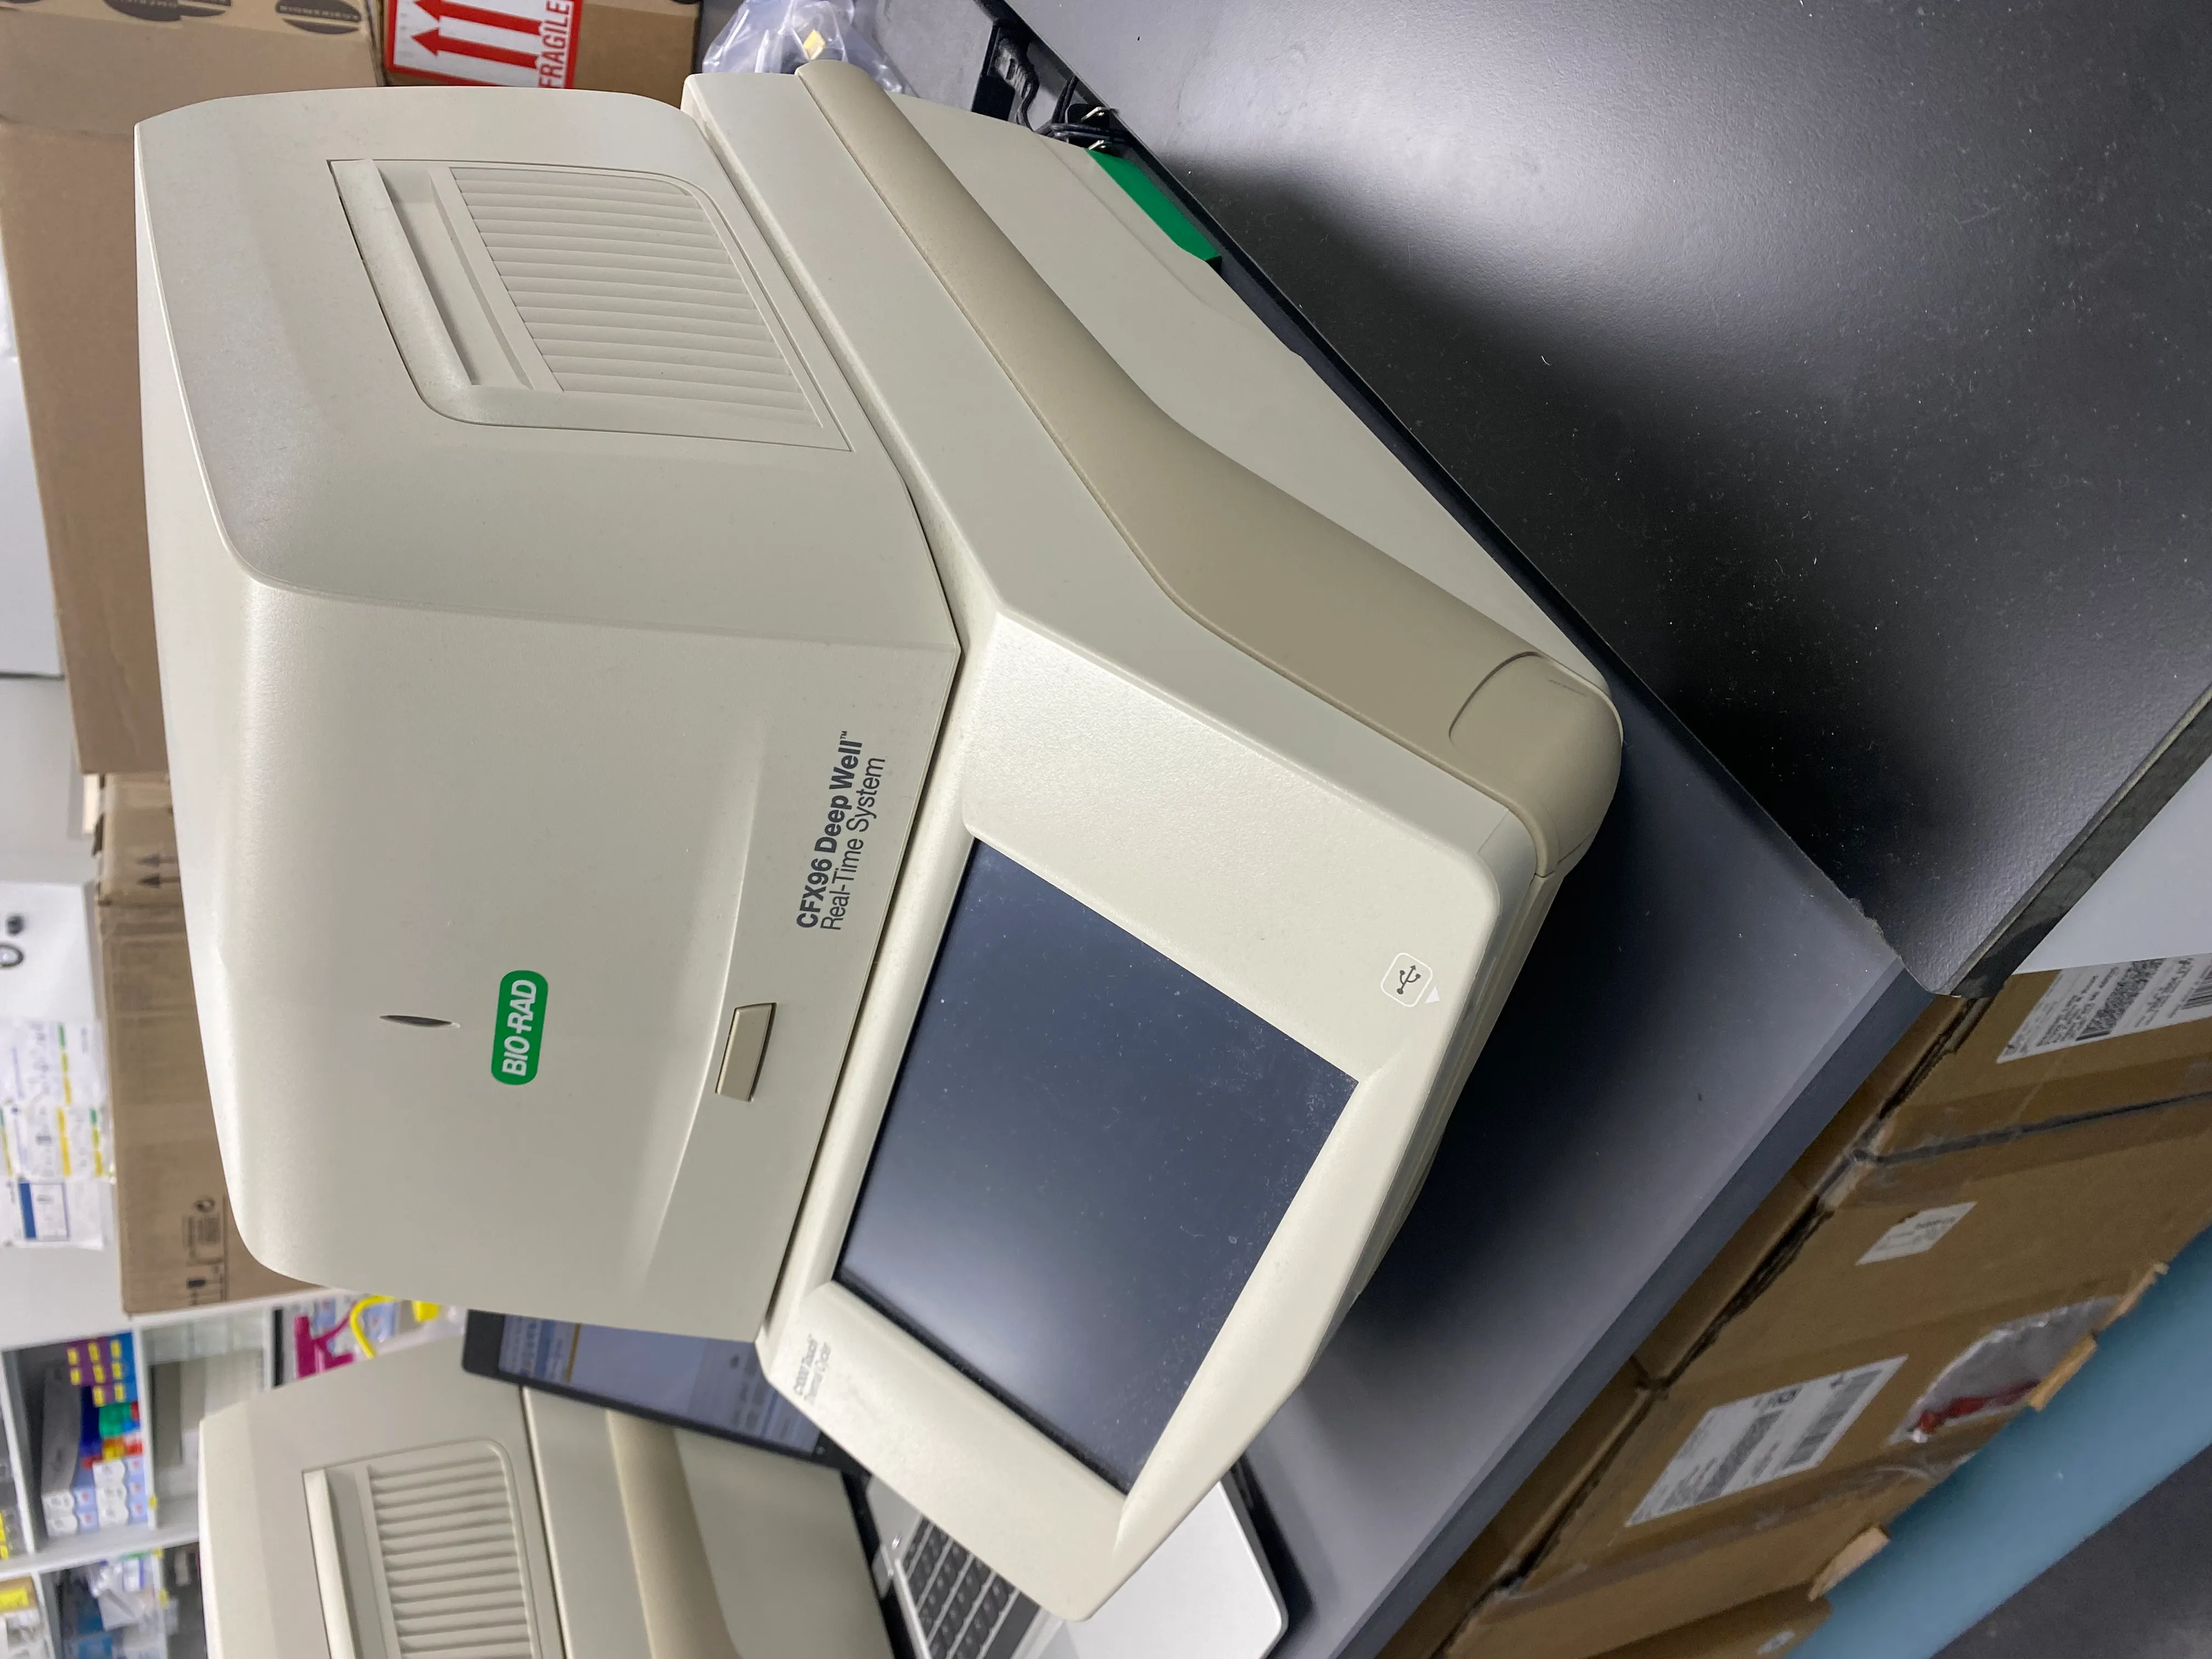 BIORAD CFX96 DeepWell Real-Time System C1000 Touch Thermal Cycler